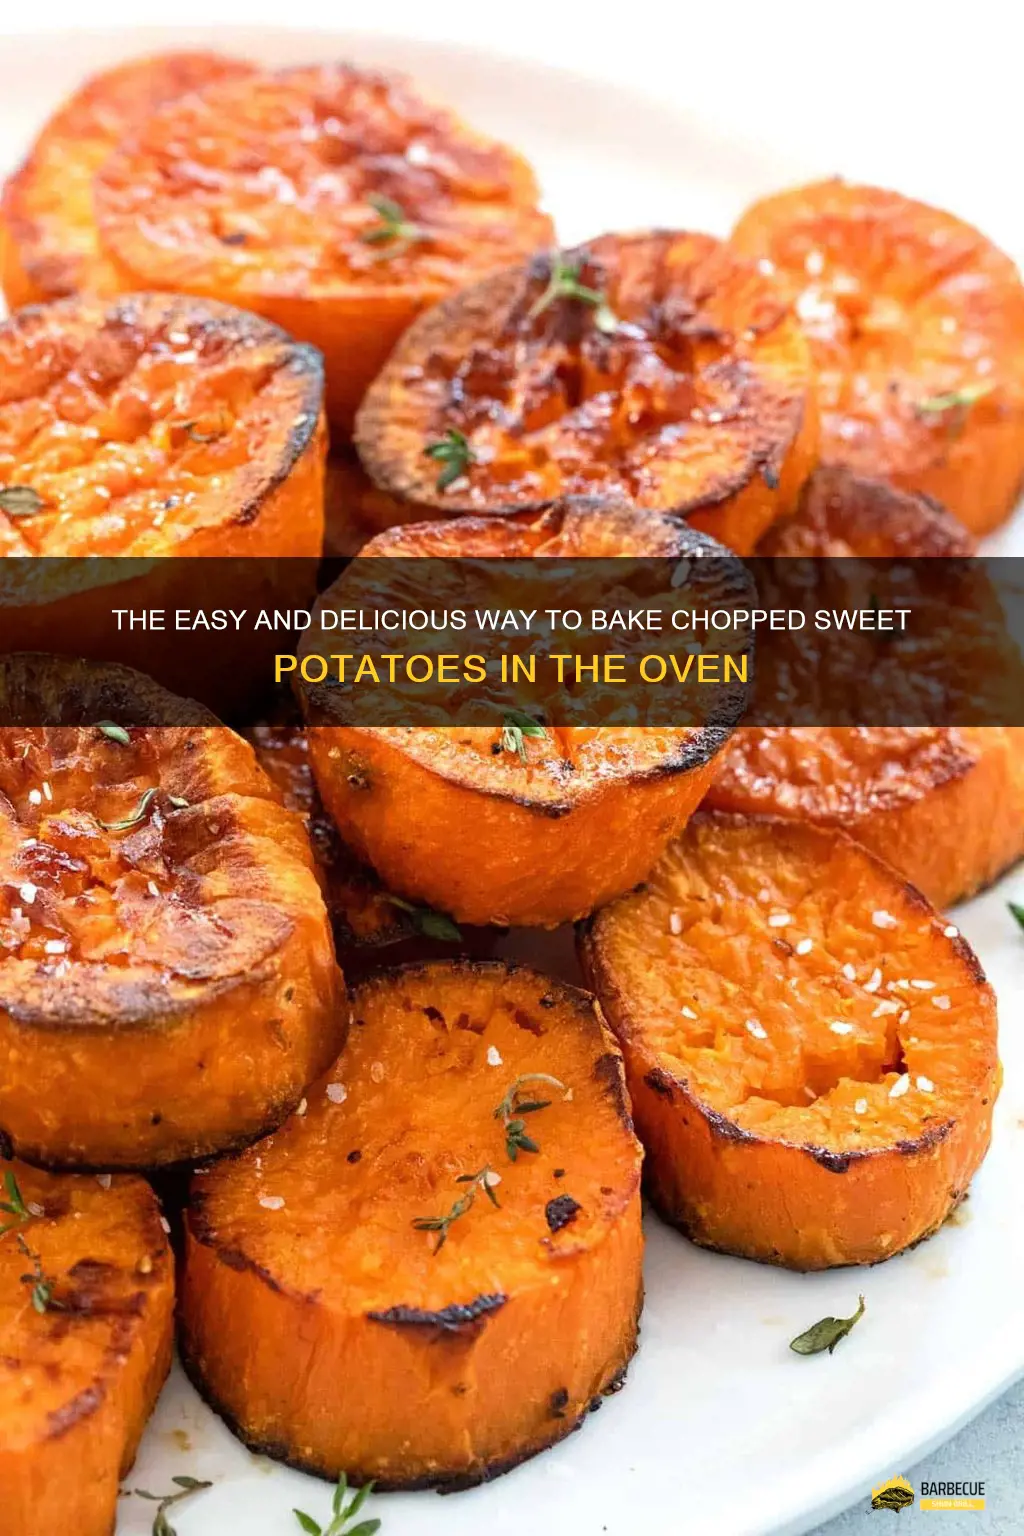 The Easy And Delicious Way To Bake Chopped Sweet Potatoes In The Oven ...